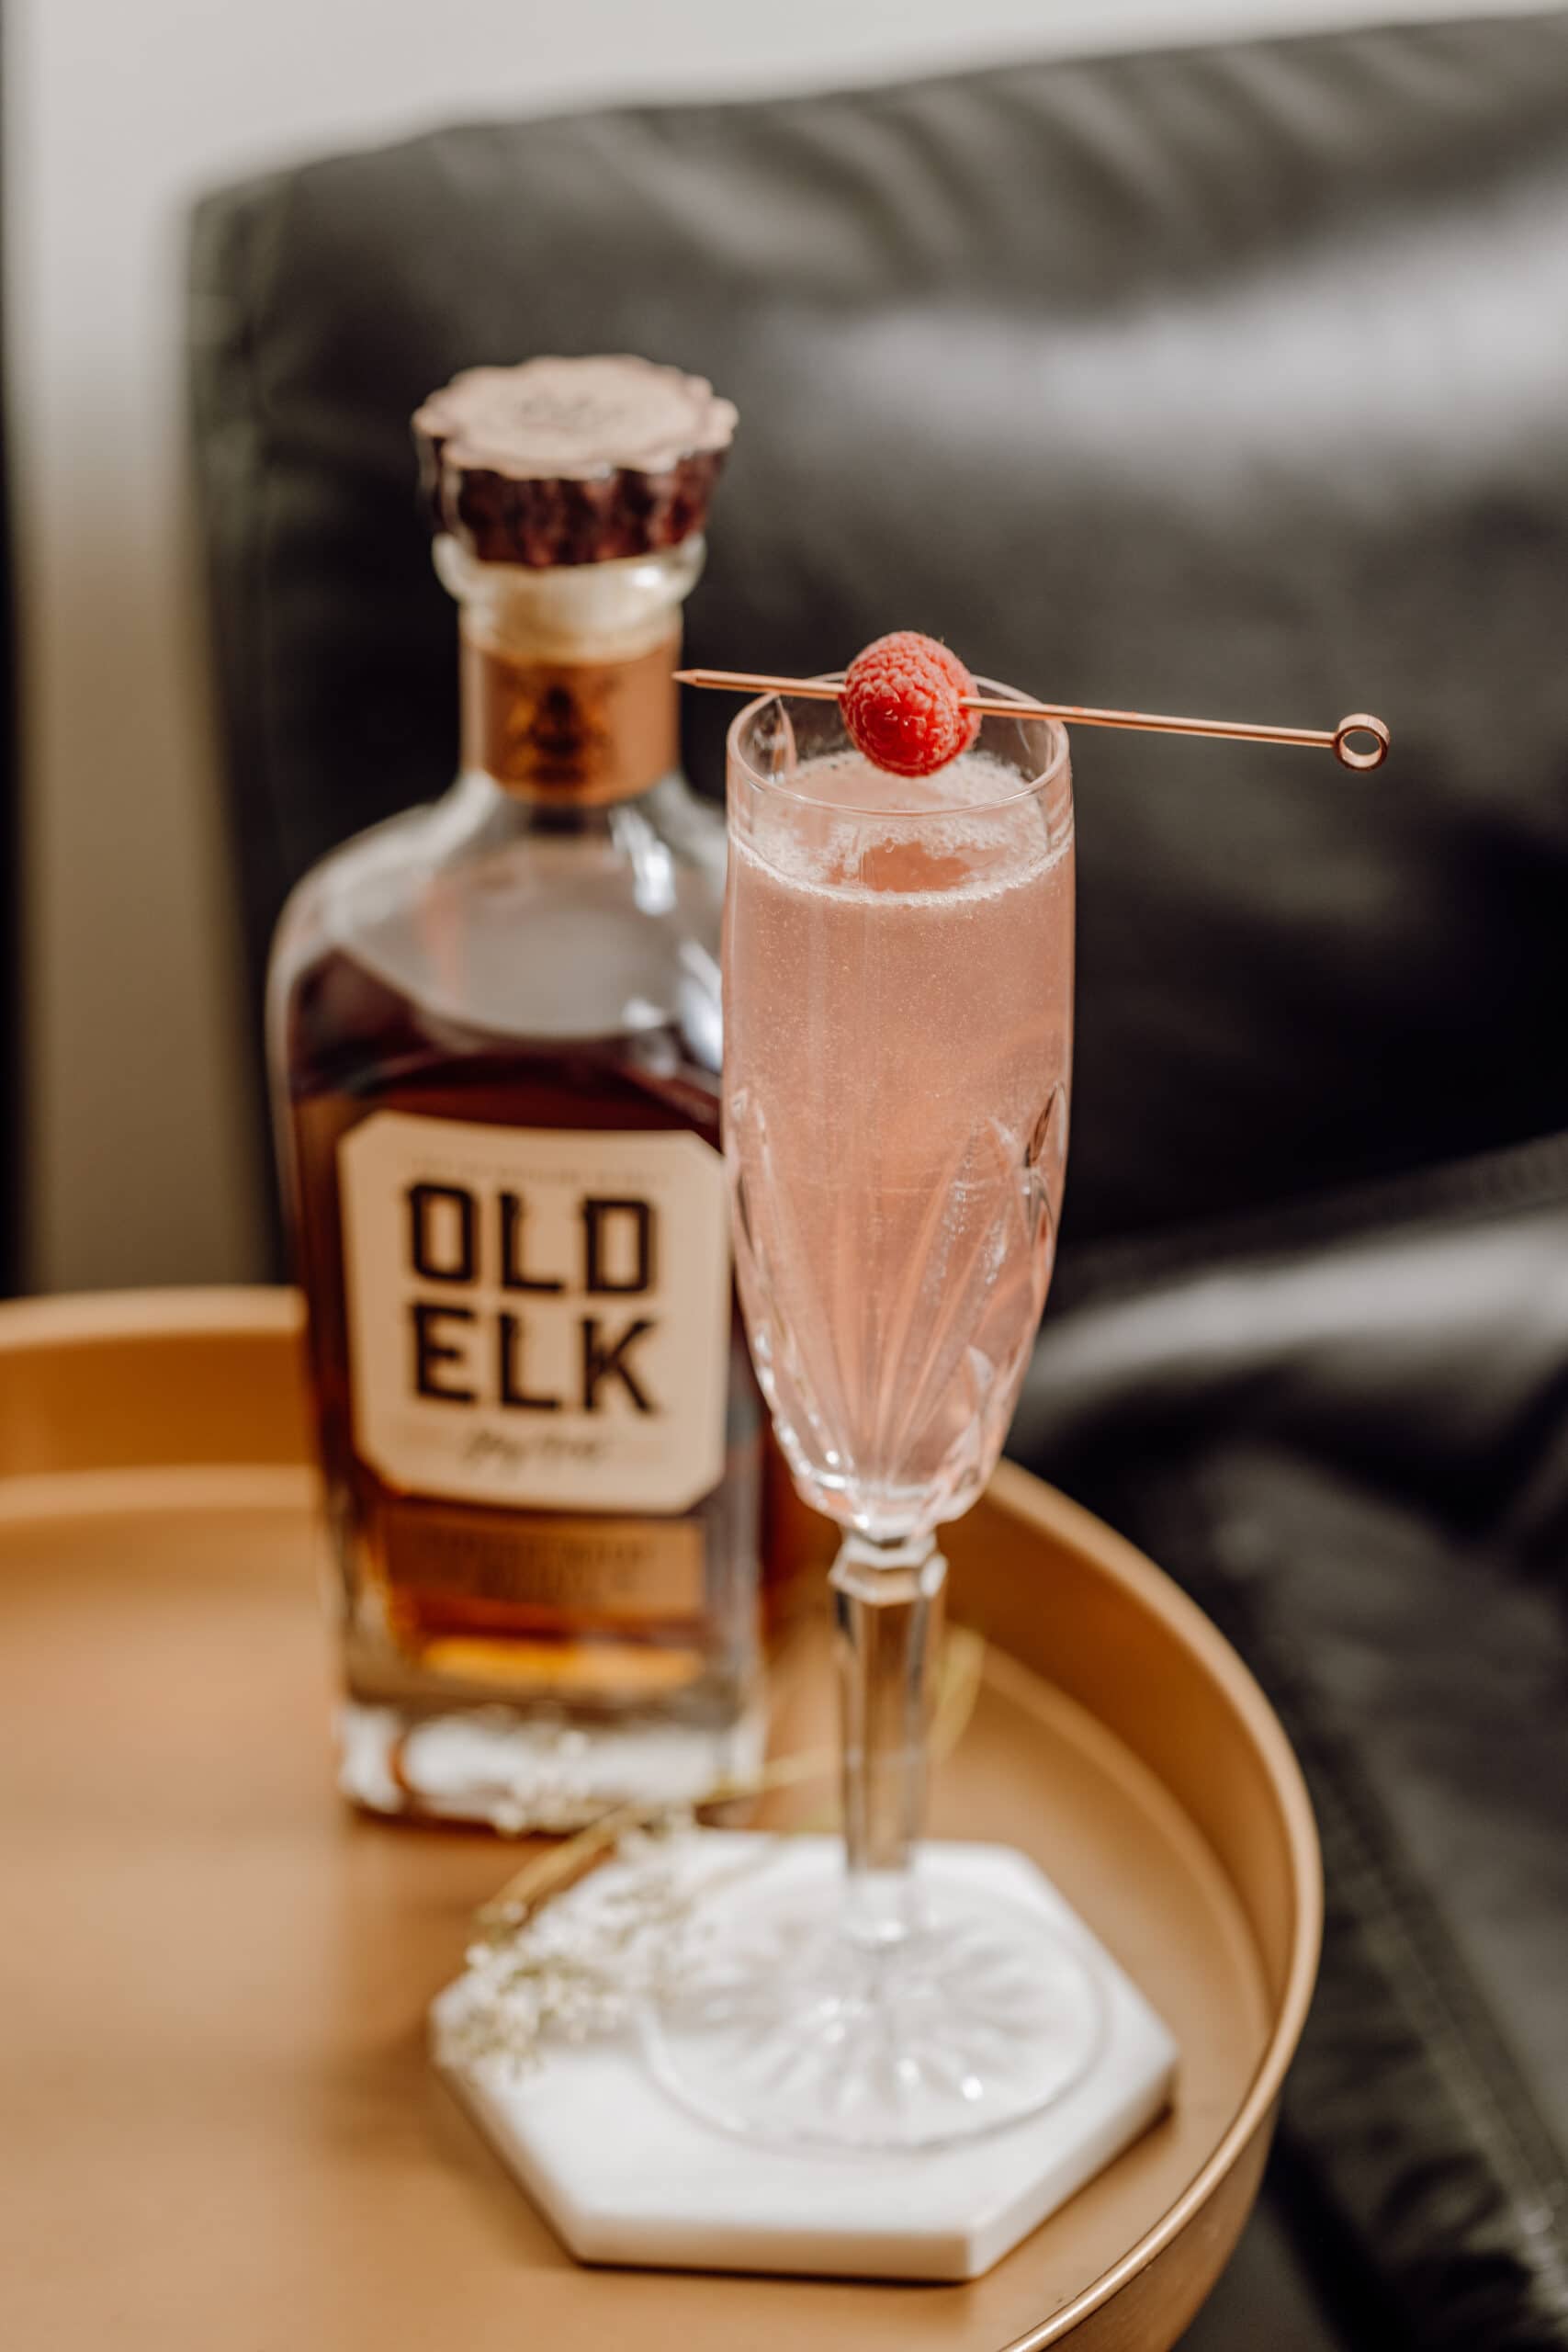 Old elk whiskey bottle with champagne glass and pink drink